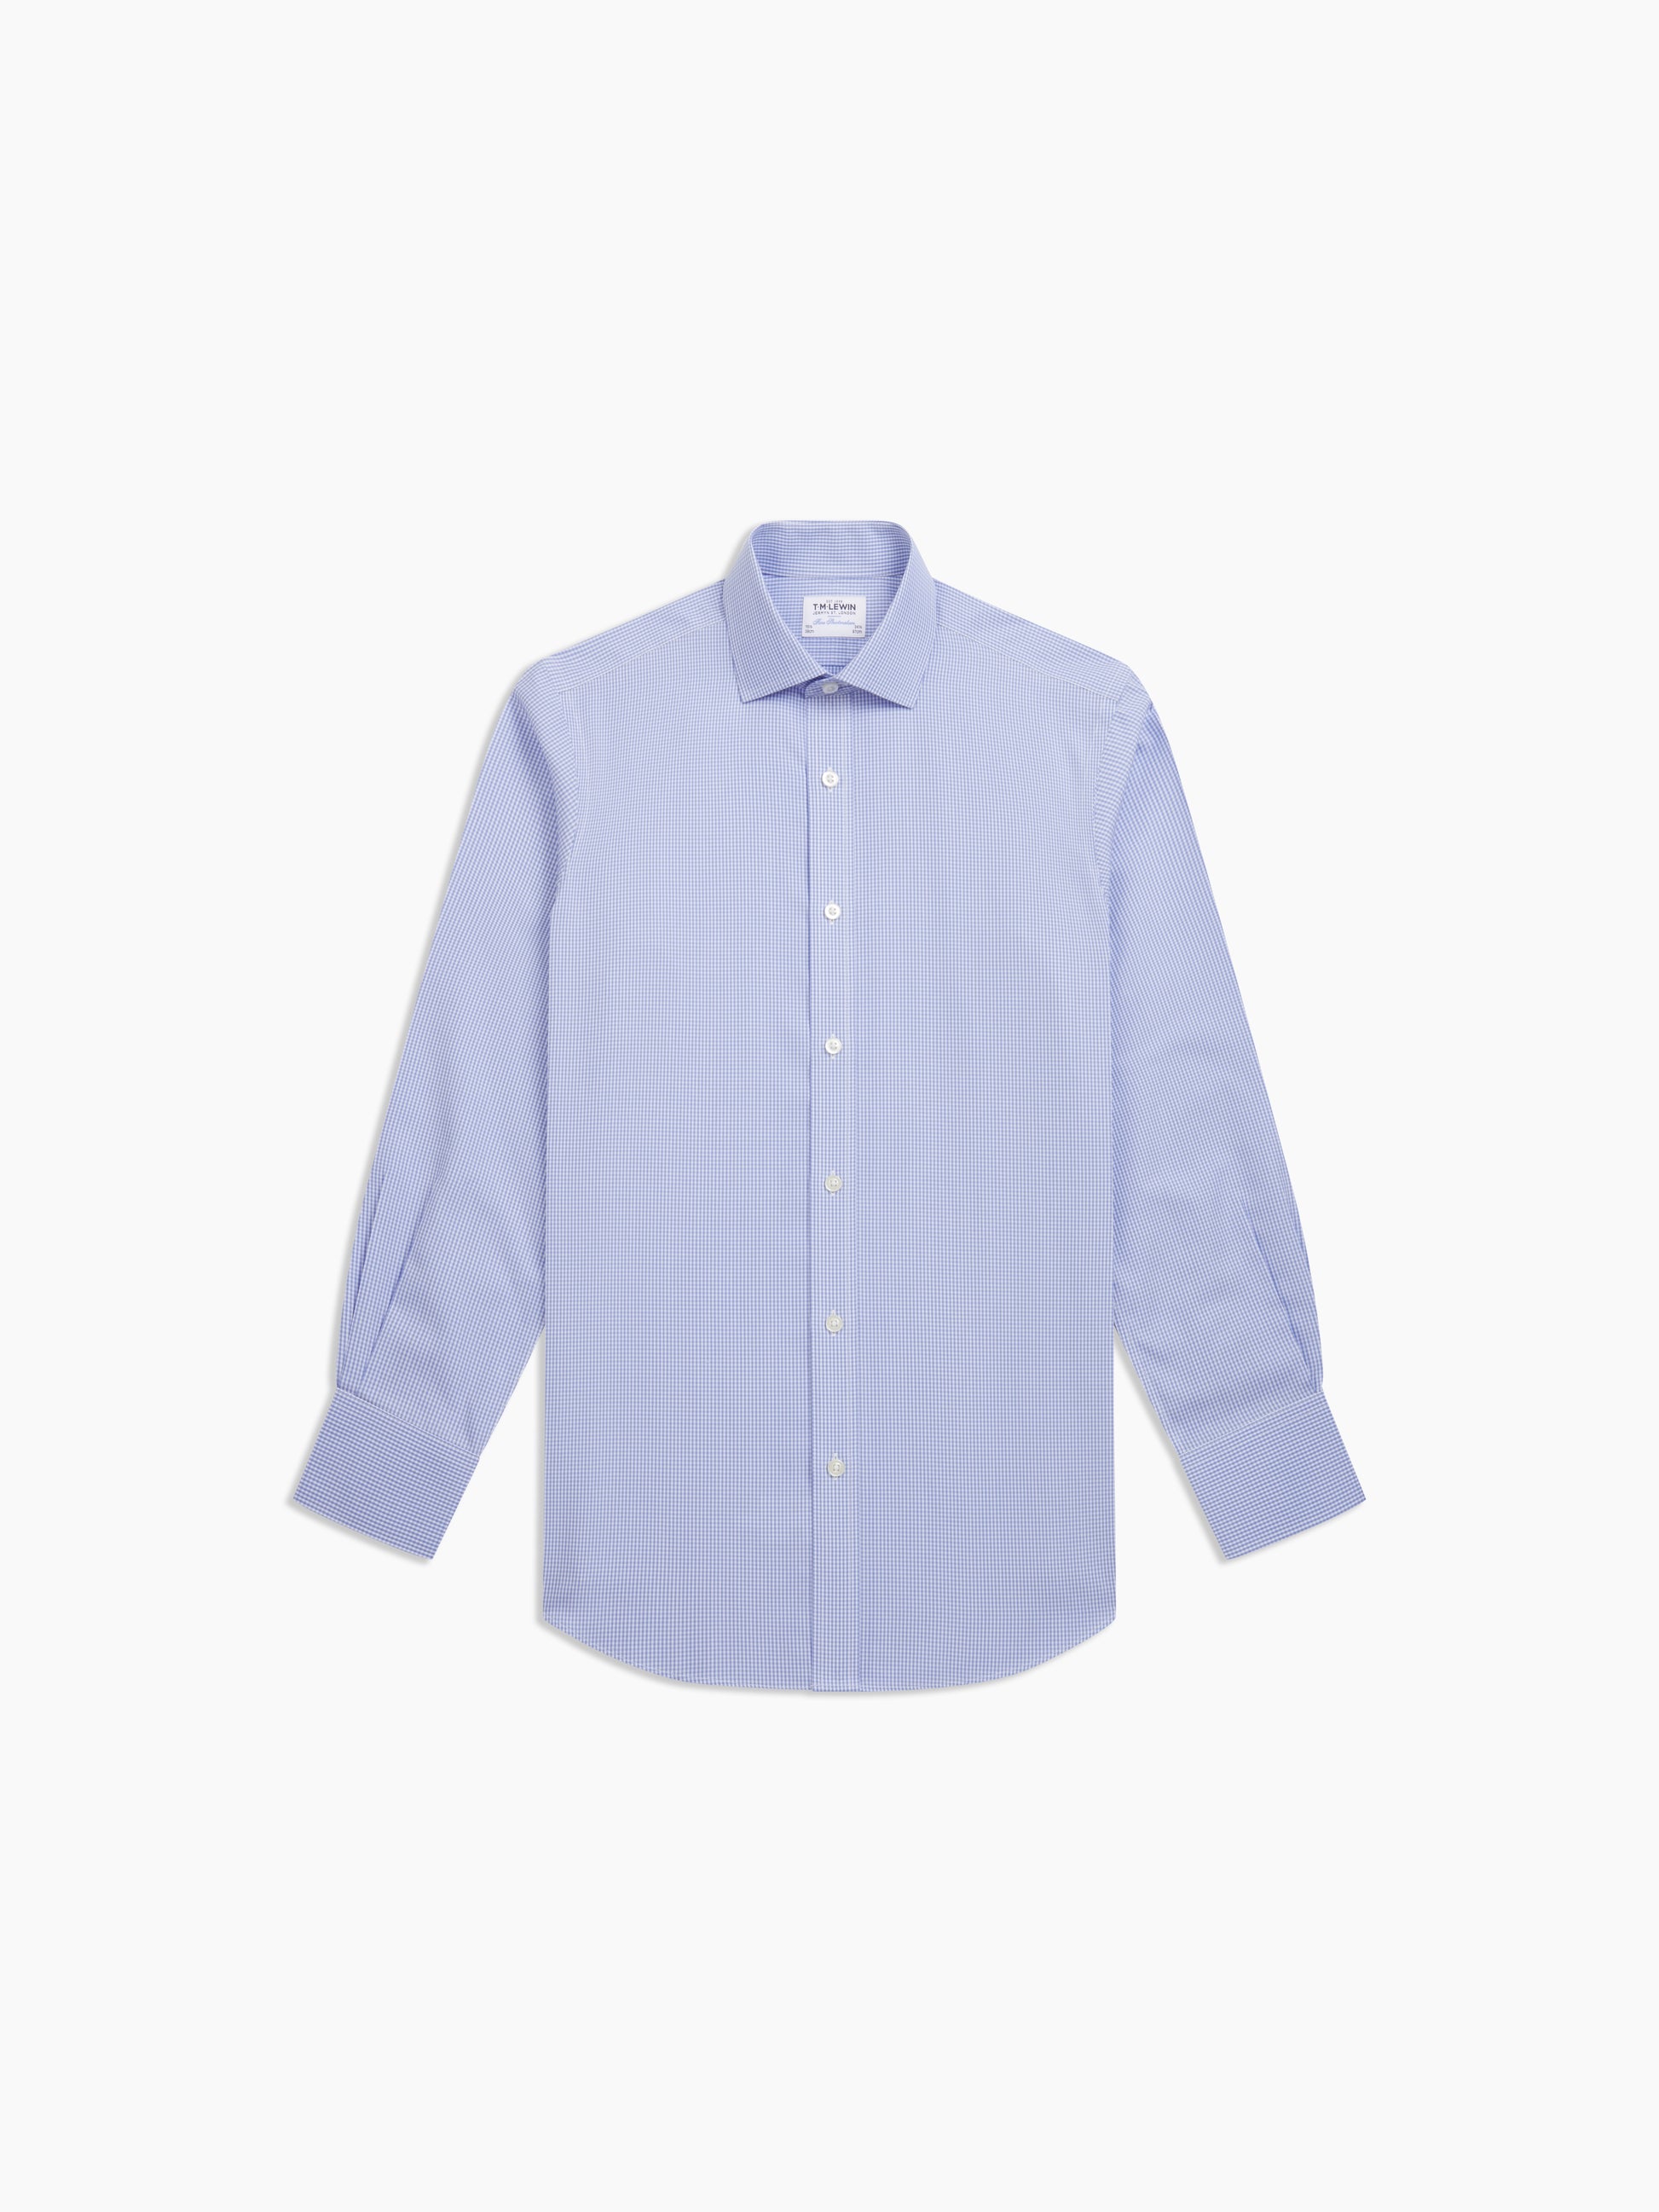 Image 2 of Non-Iron Light Blue Gingham Dobby Fitted Single Cuff Classic Collar Shirt